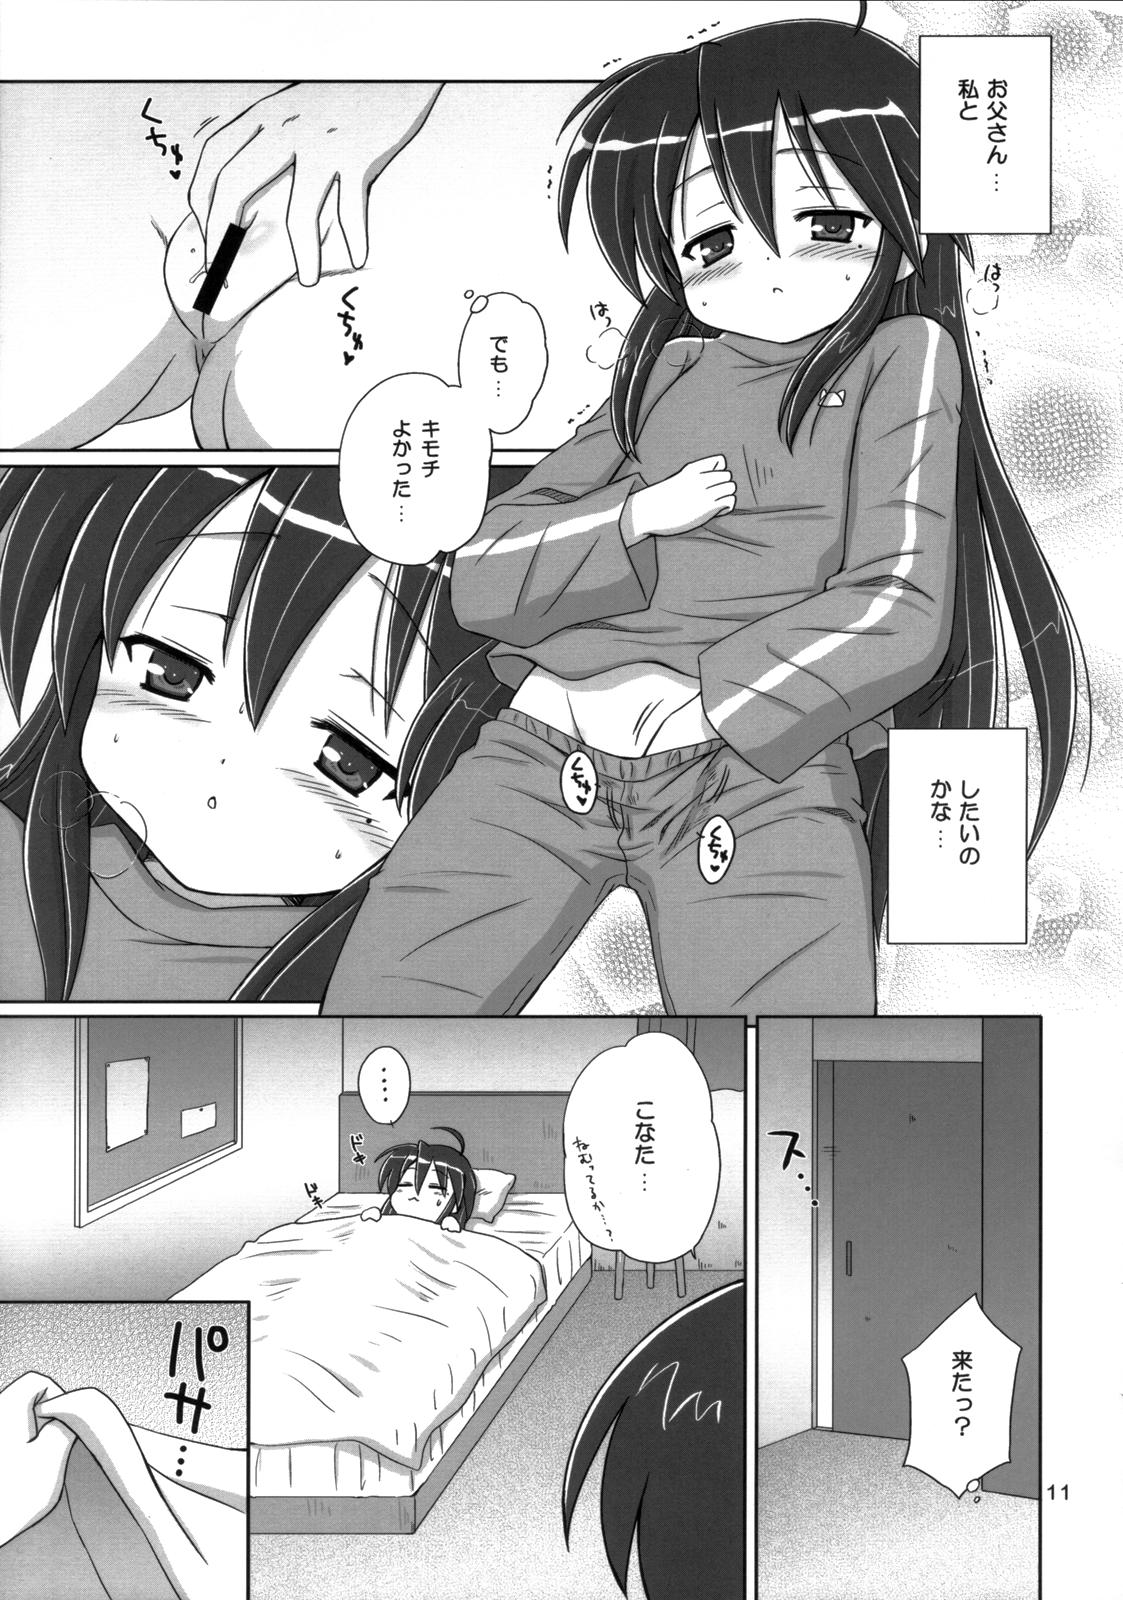 Handjobs Konata Flavor - Lucky star Pussy To Mouth - Page 10